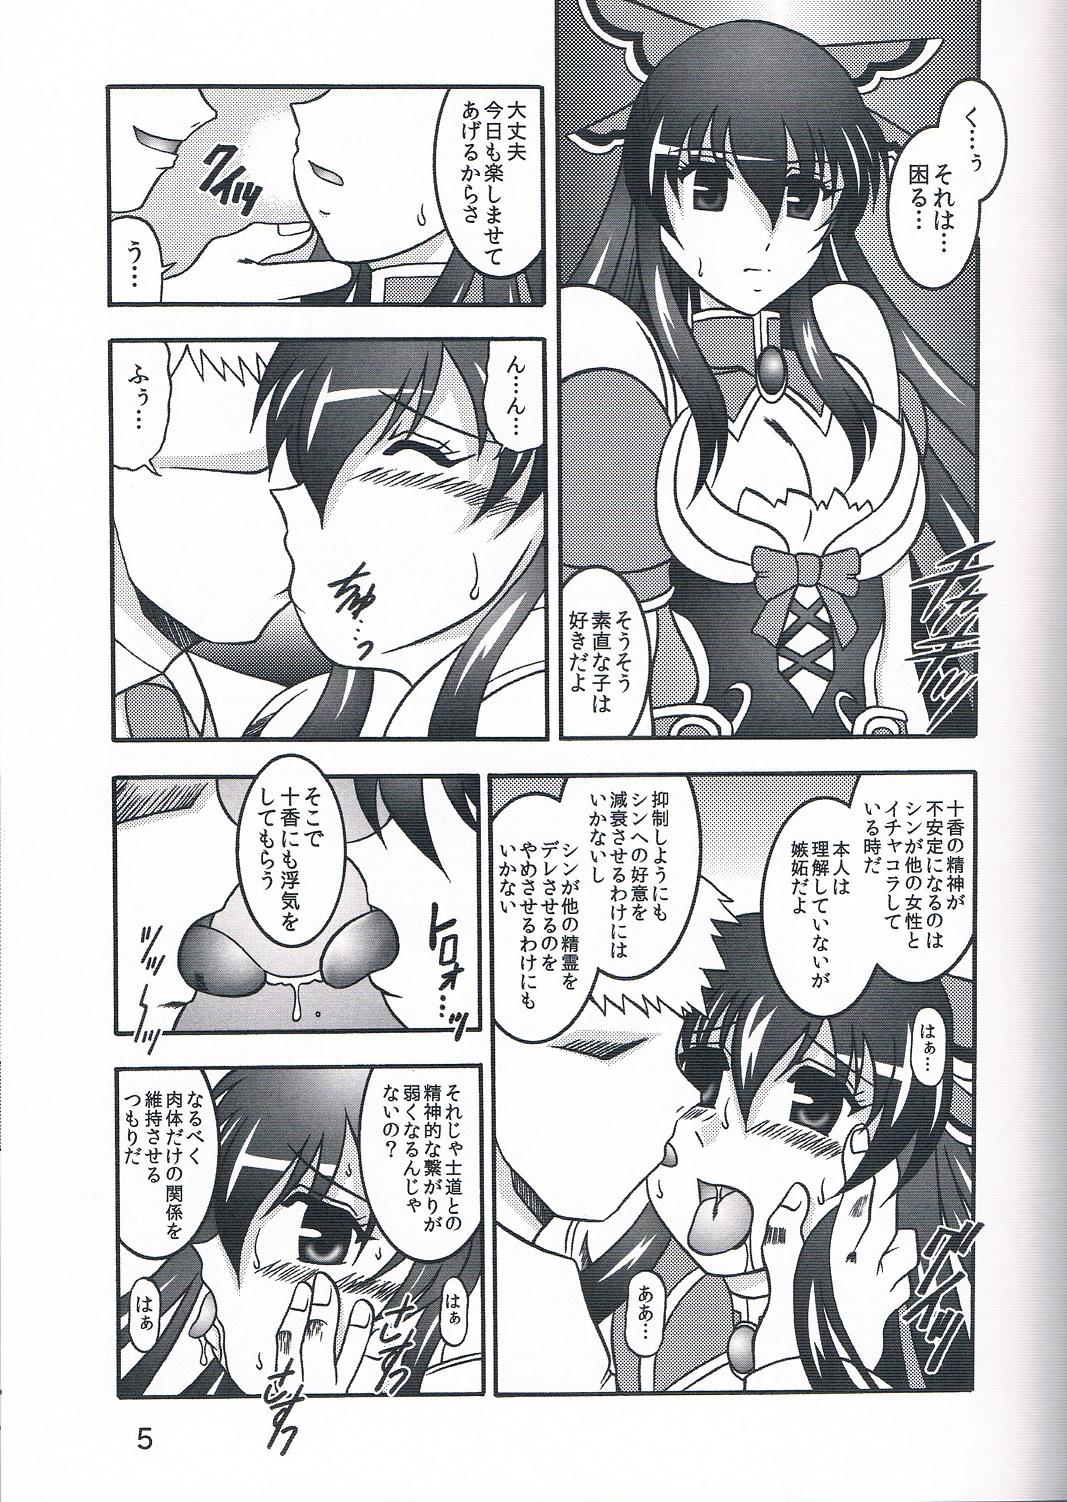 Old Vs Young Greed THE Live - Date a live  - Page 4